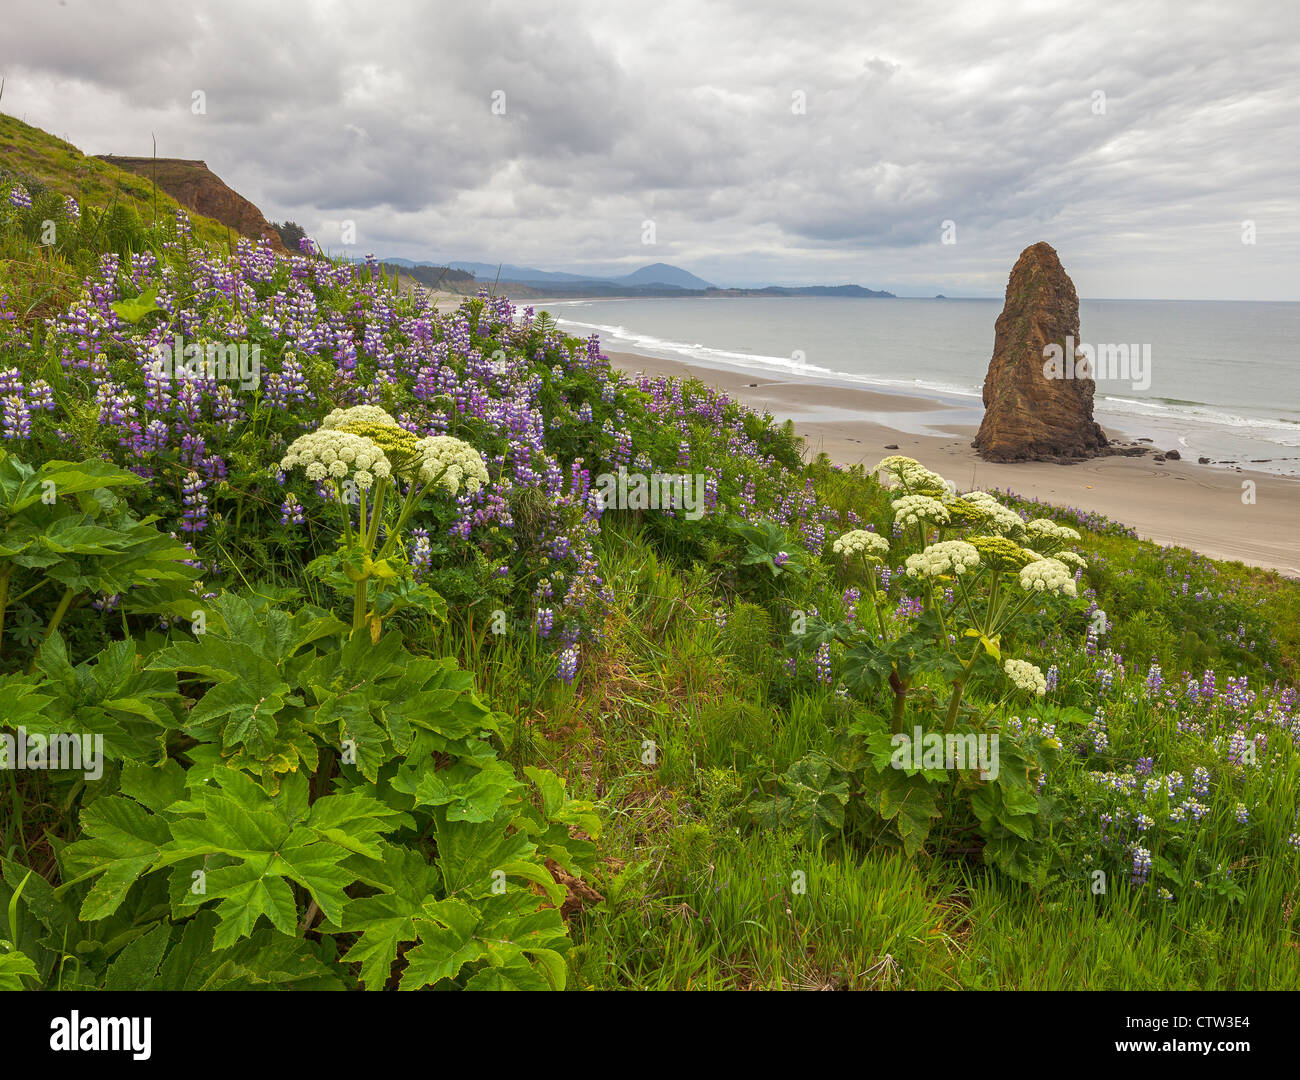 Cape Blanco State Park, Oregon: Hillside of lupine and cow parsnip with single seastack on the beach under stormy skies Stock Photo